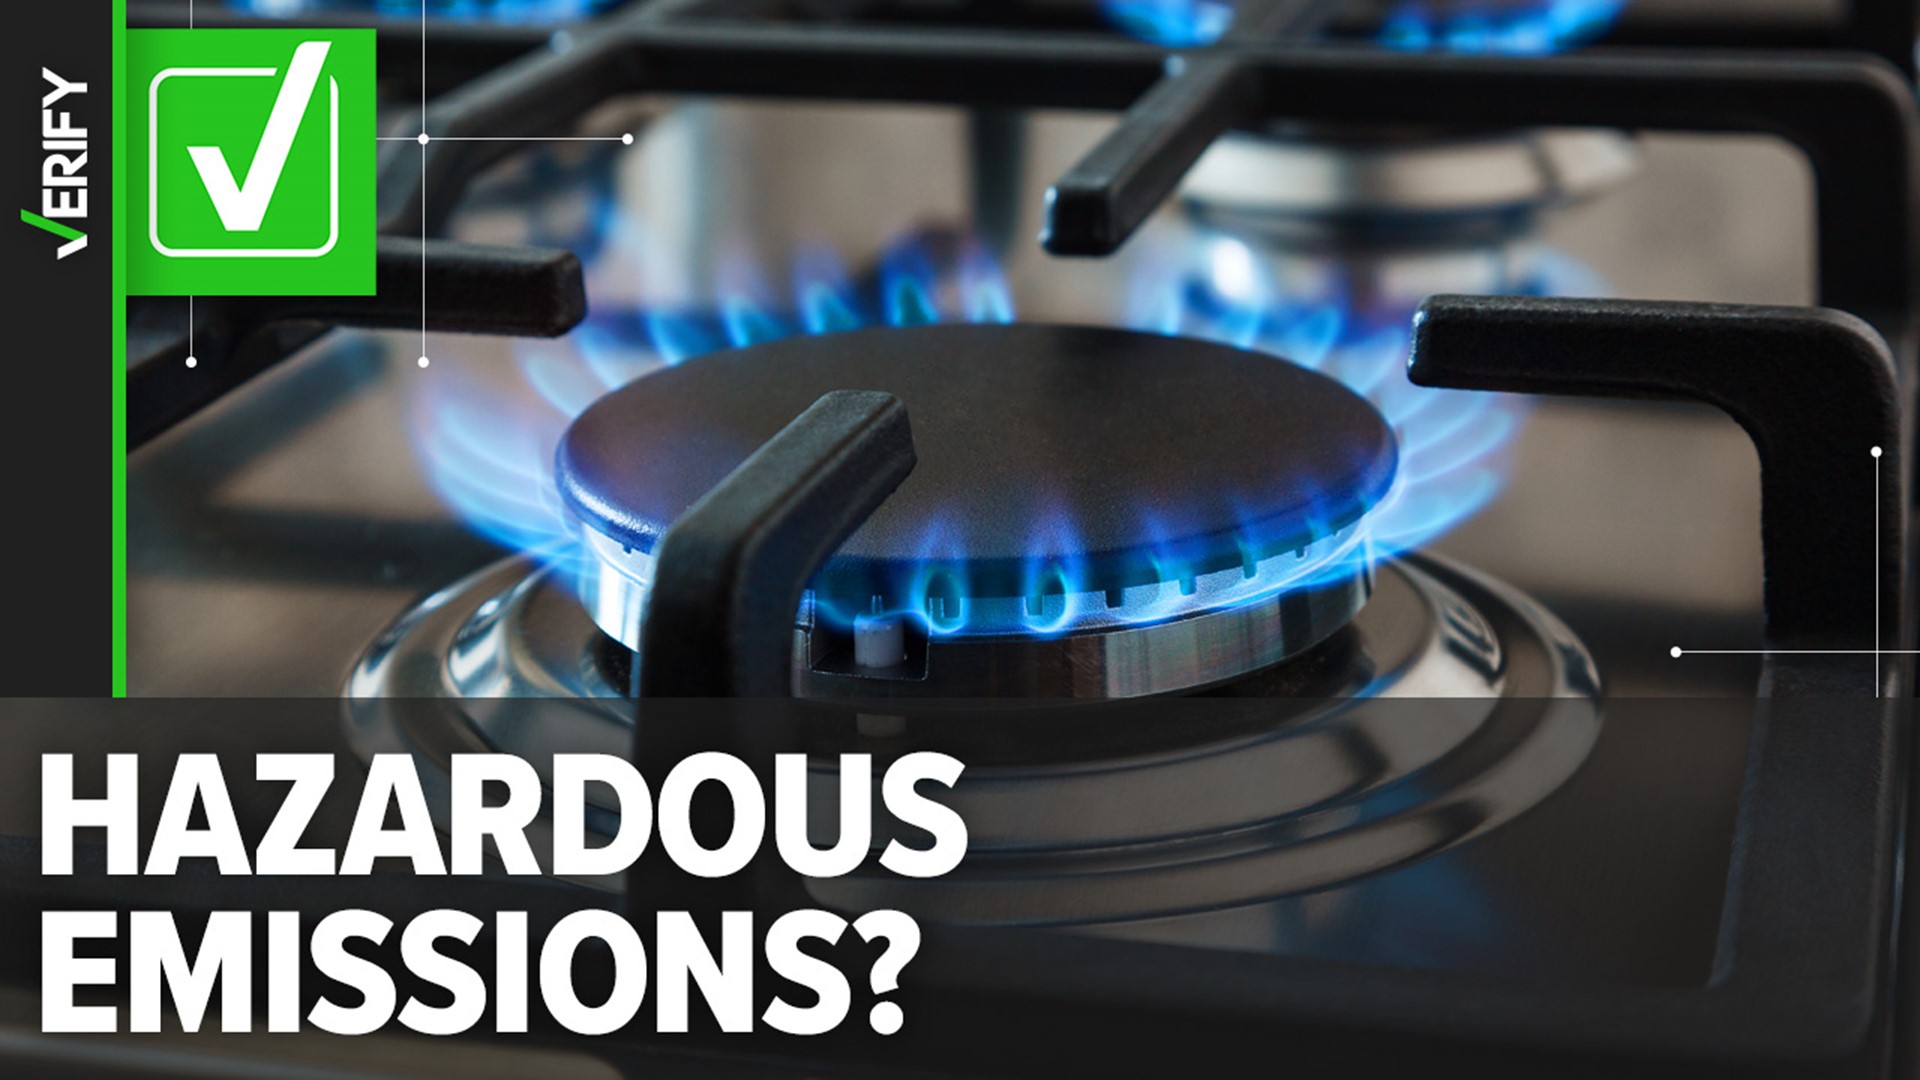 Studies have shown gas stoves do produce hazardous emissions, but it’s important to note a well-ventilated kitchen can help minimize the effects on your health.